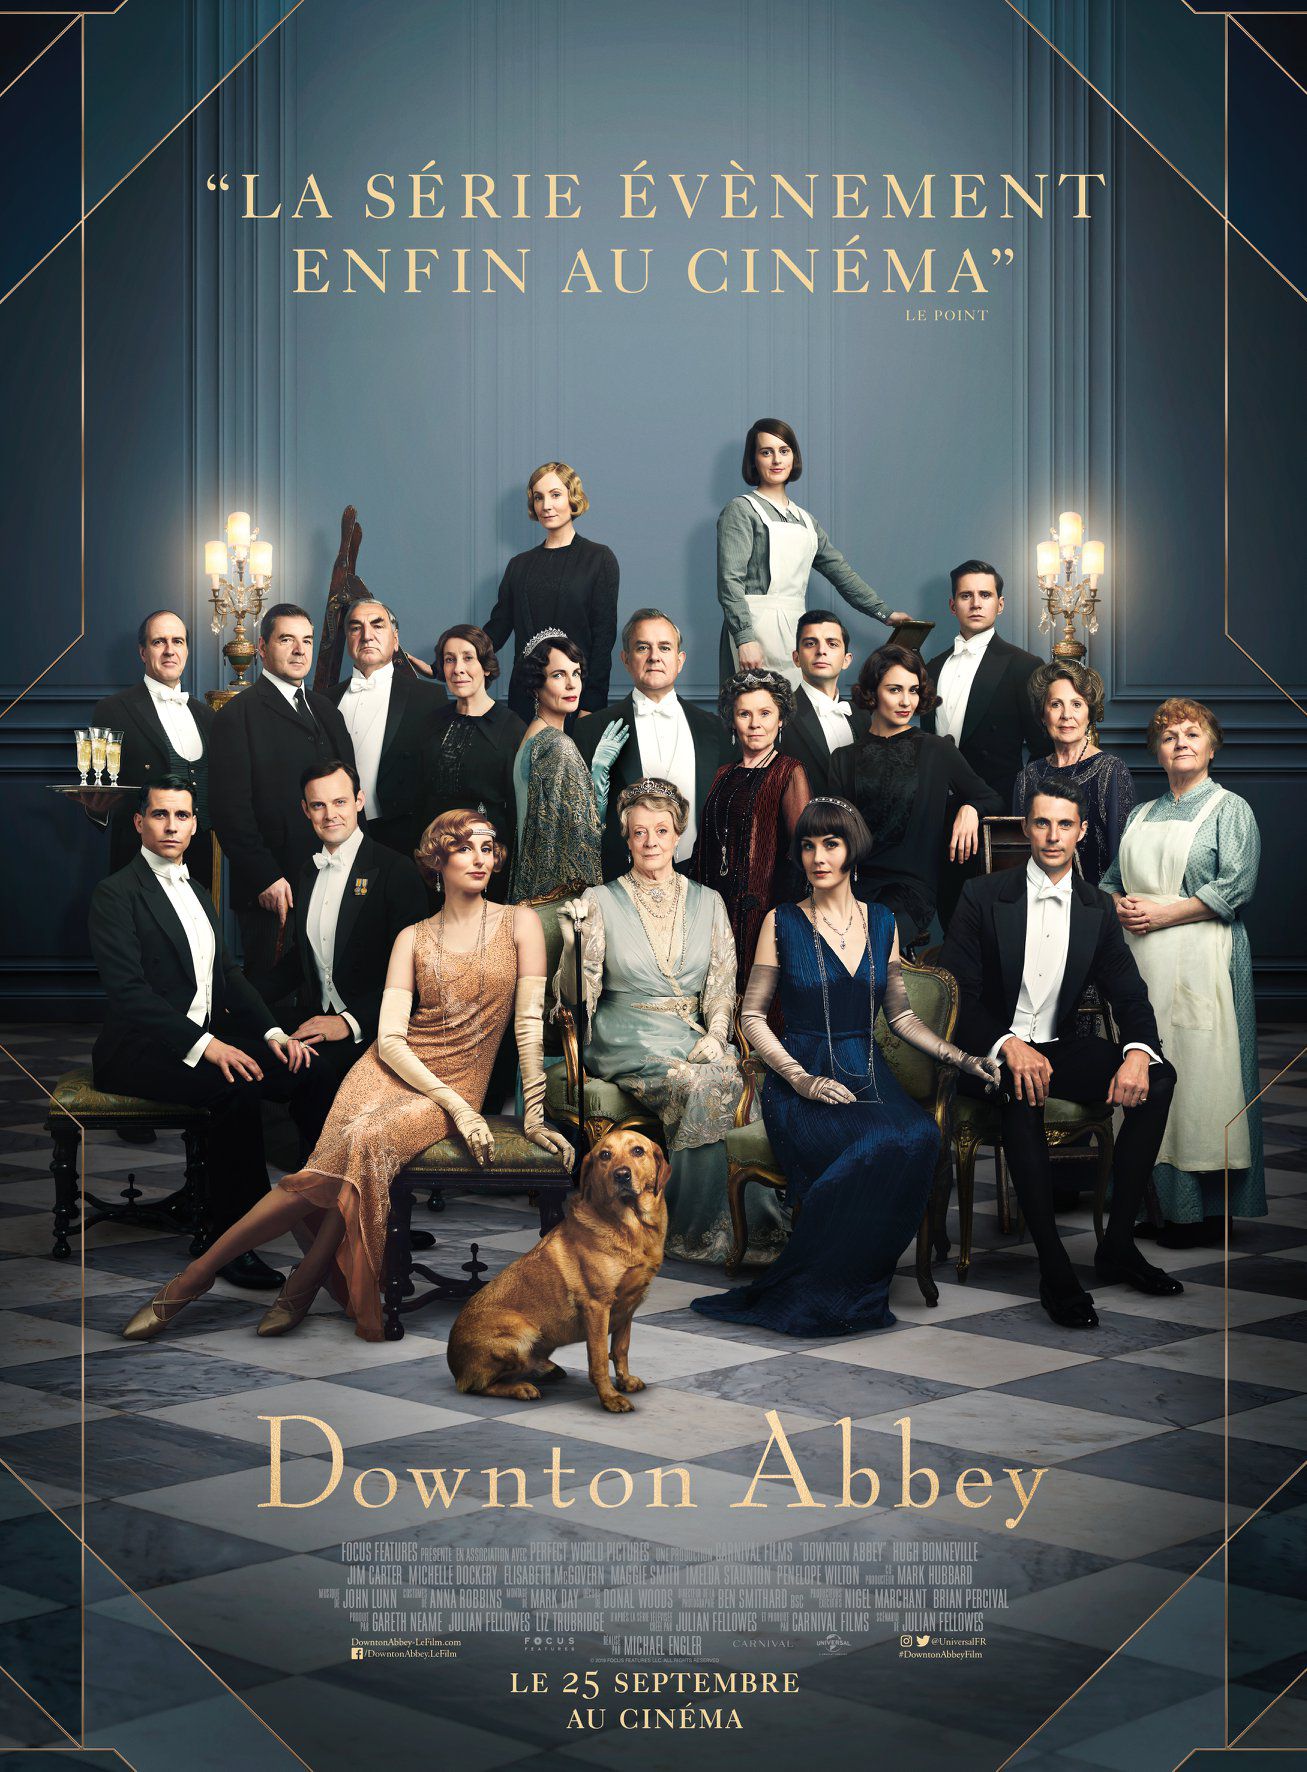 Downton Abbey - Film (2019) streaming VF gratuit complet